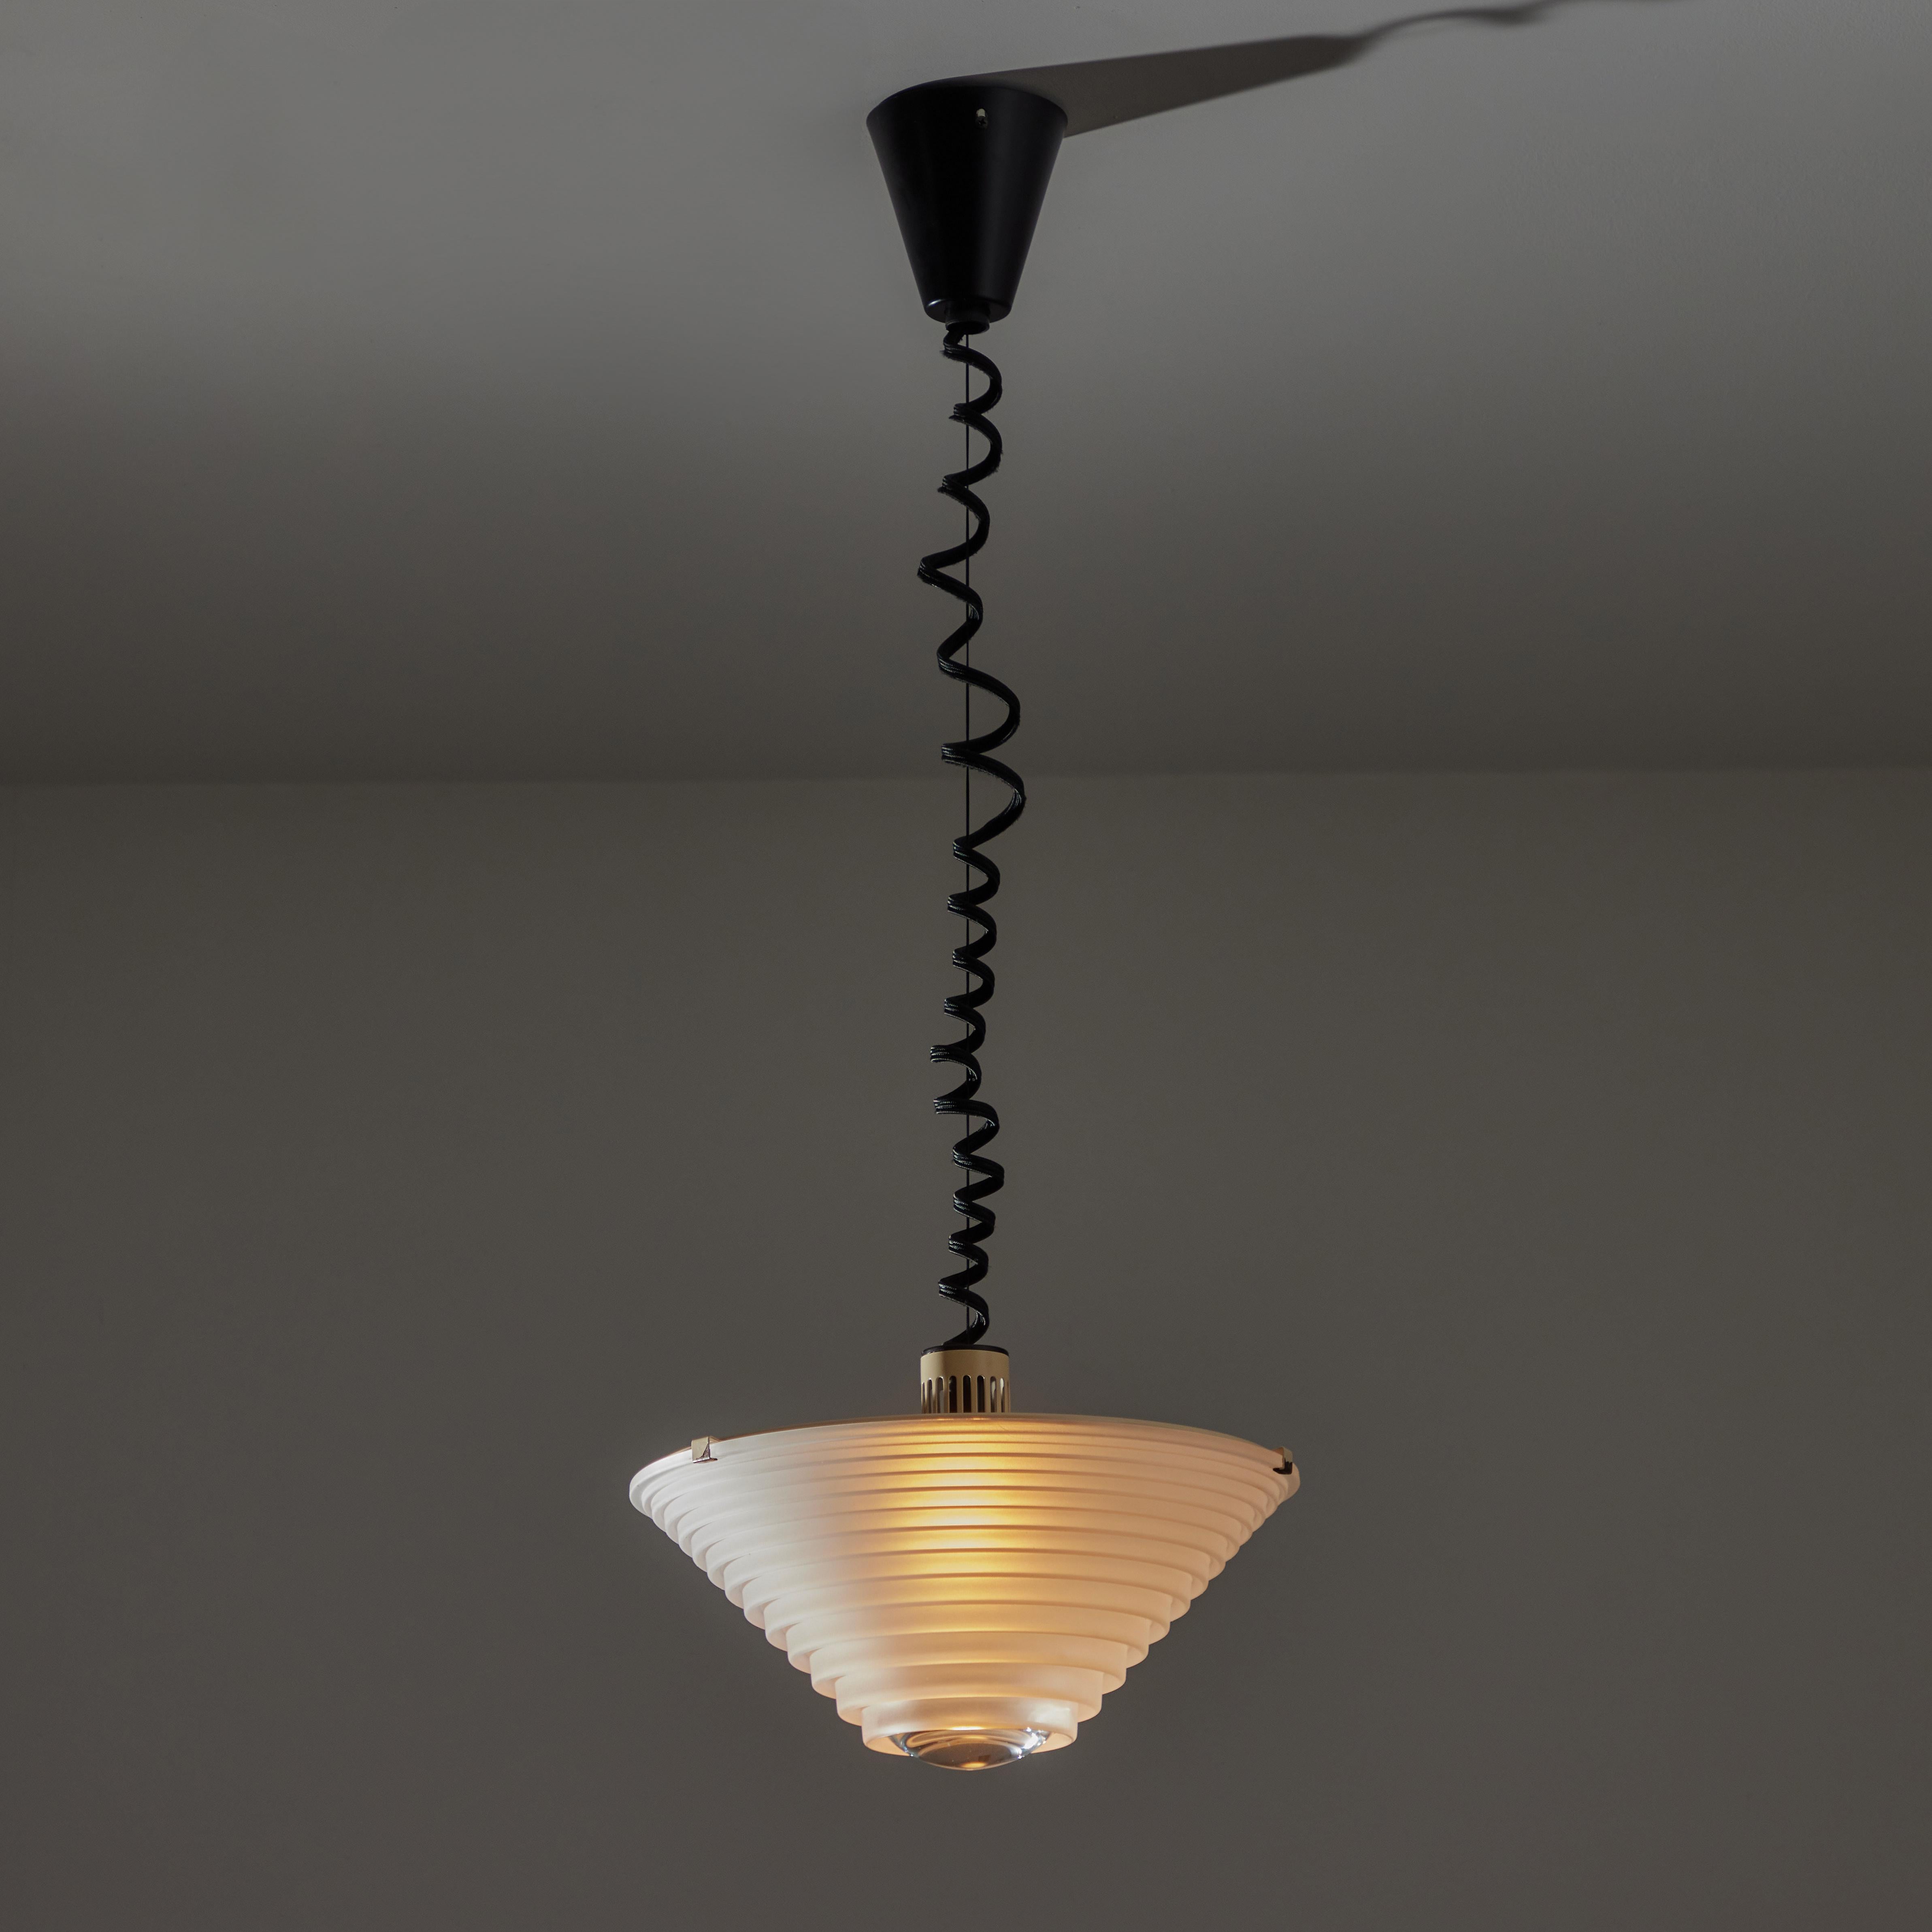 ‘Egina’ Pendant by Angelo Mangiarotti for Artemide. Designed and manufactured in Italy in 1979. Etched molded glass with a tiered typography. Enameled top electrical body and pigtail lamp cord. Height adjustable while installed by patented pulley